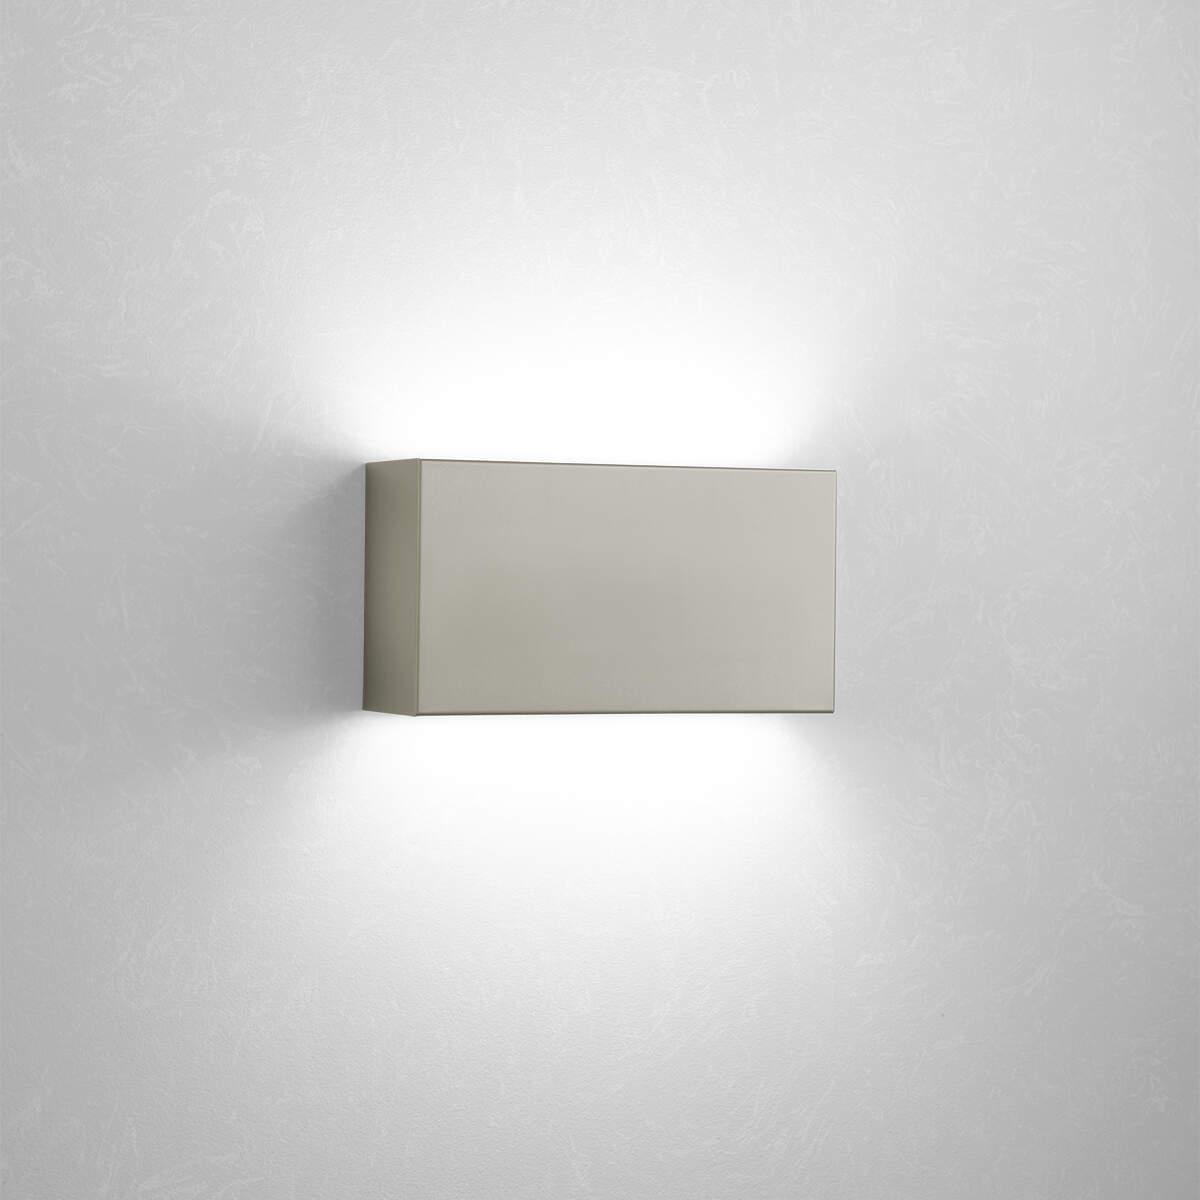 A box-like linear wall sonce with uplight and downlight